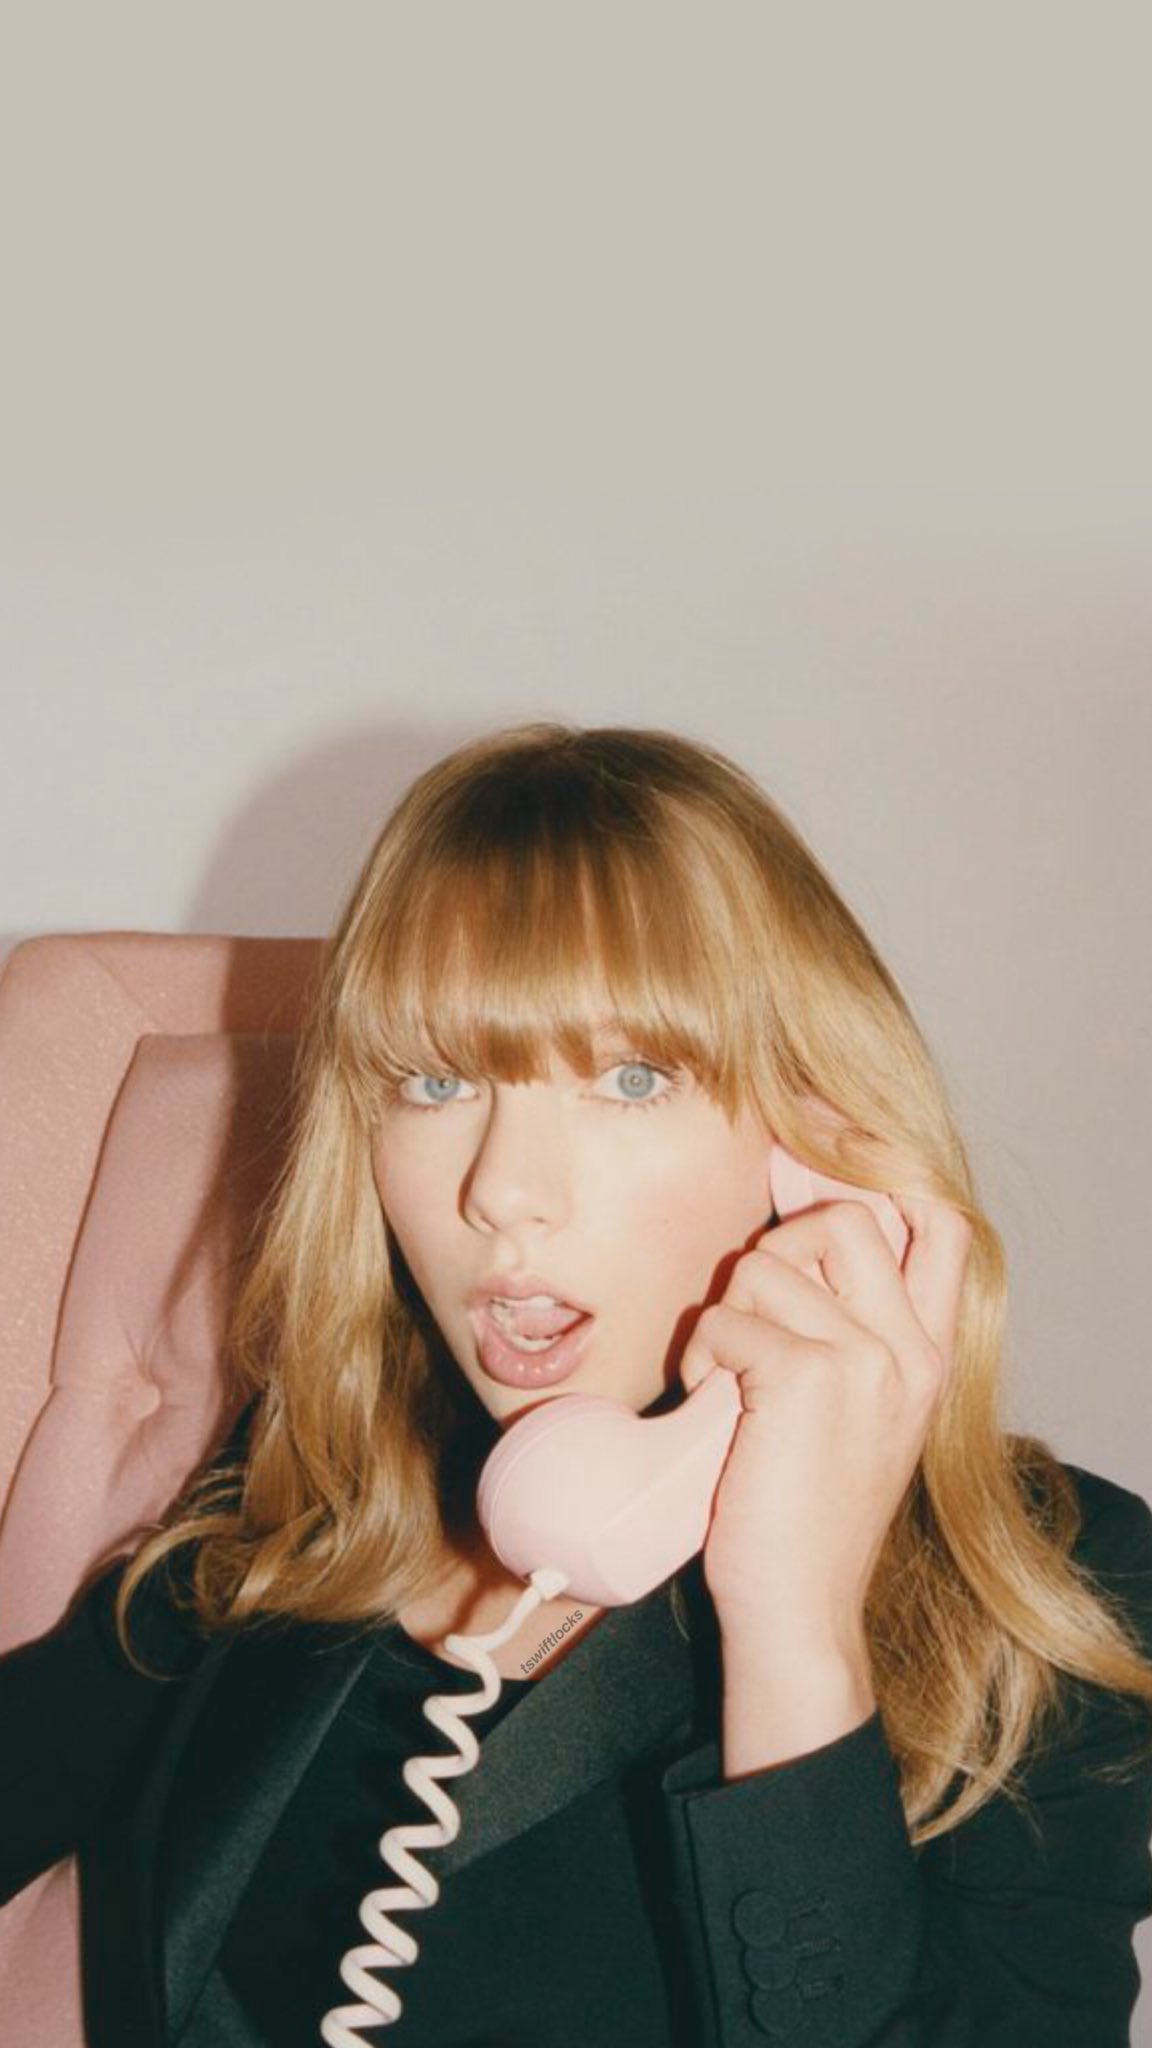 Taylor Swift Photoshoot For AAP Wallpapers